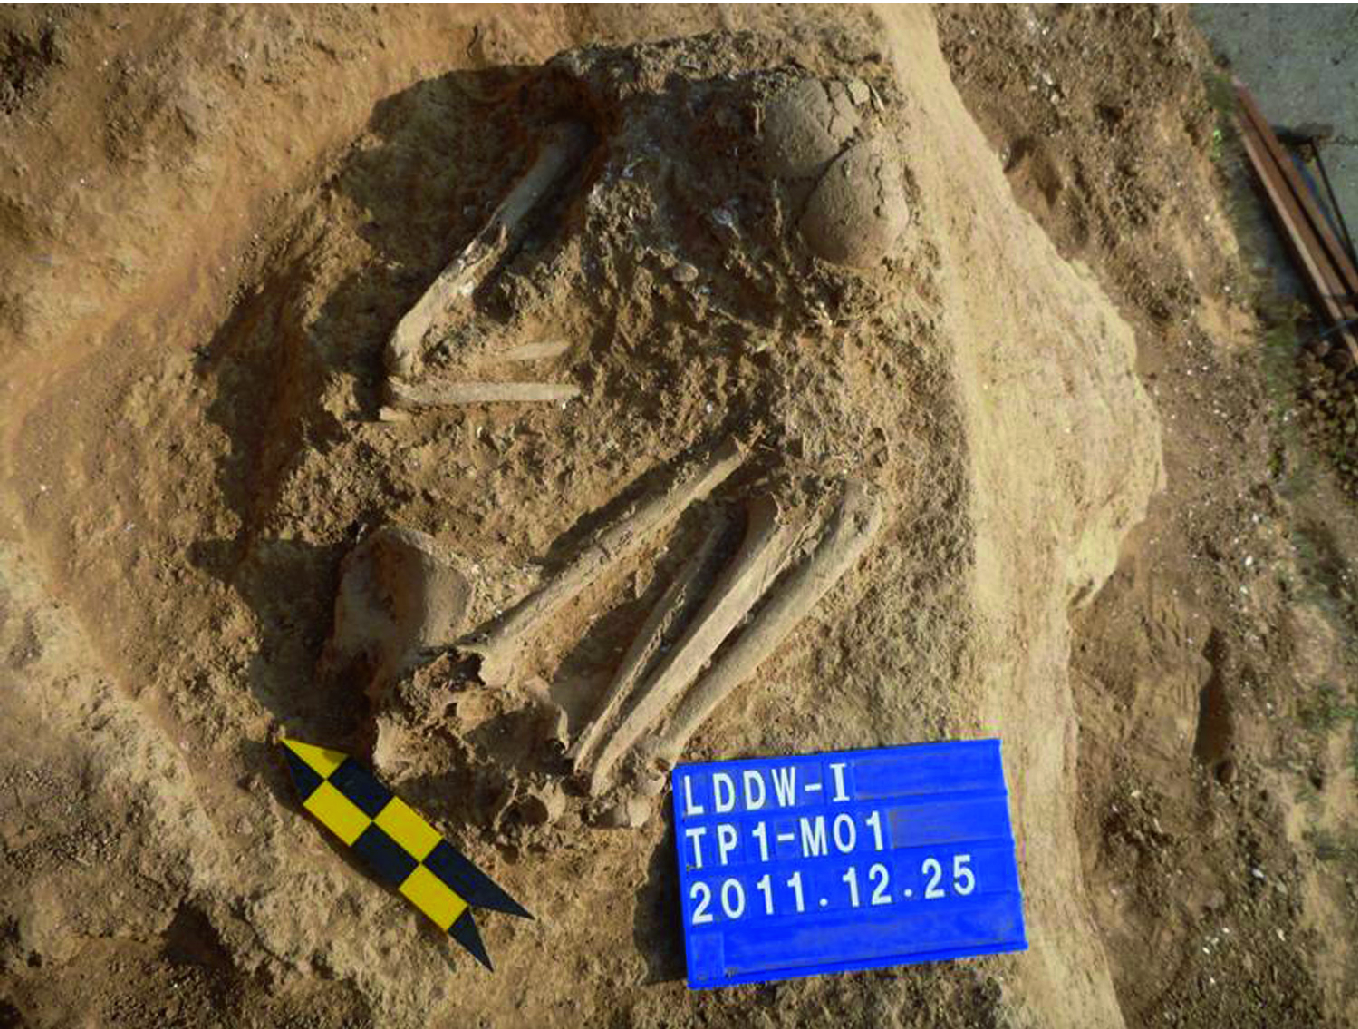 Perspectives On Early Holocene Maritime Ethnic Groups Of The Taiwan Strait Based On The Liangdao Man Skeletons Springerlink